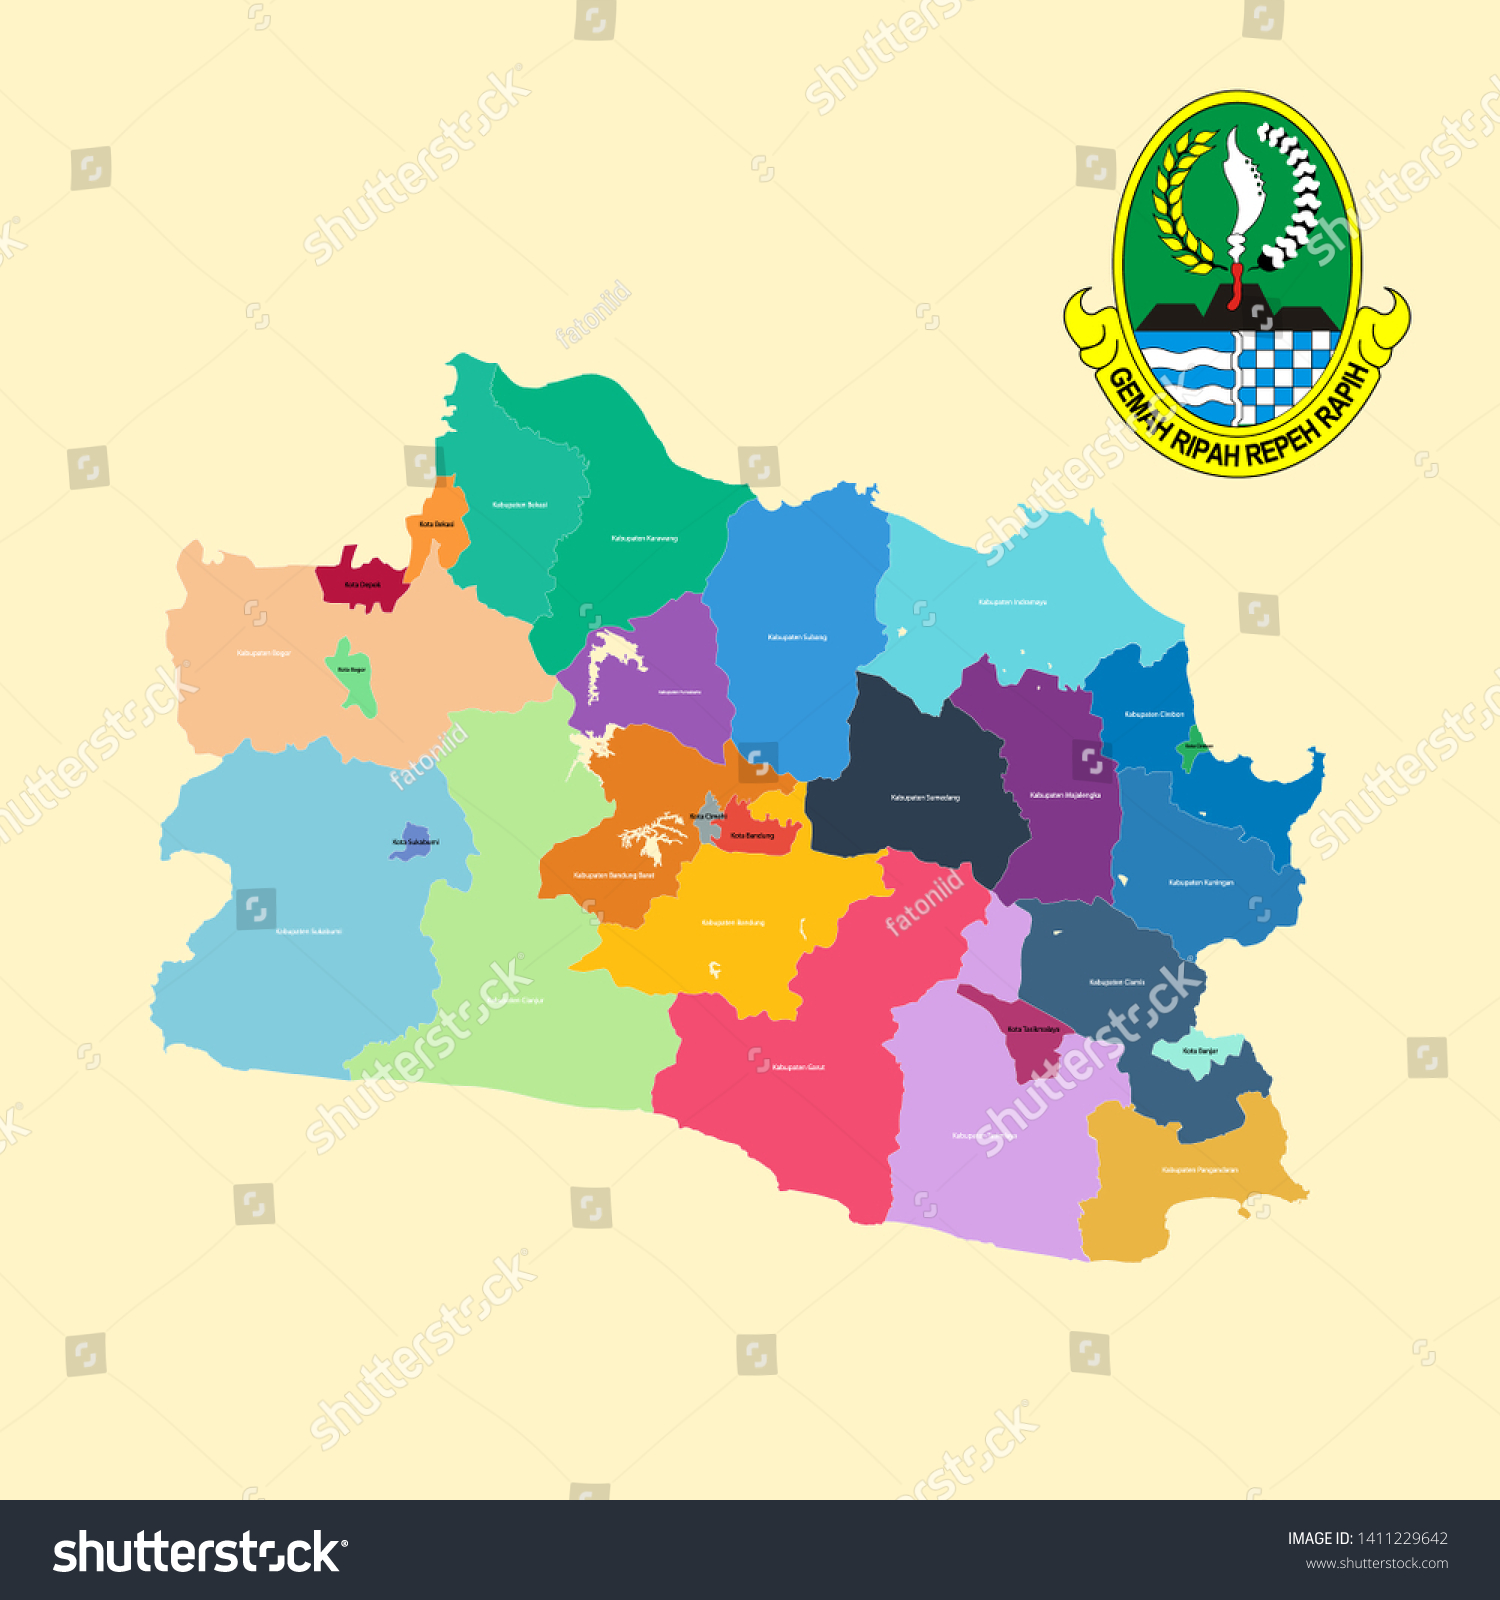 SVG of Colored Map and Logo of Jawa Barat (West Java) svg